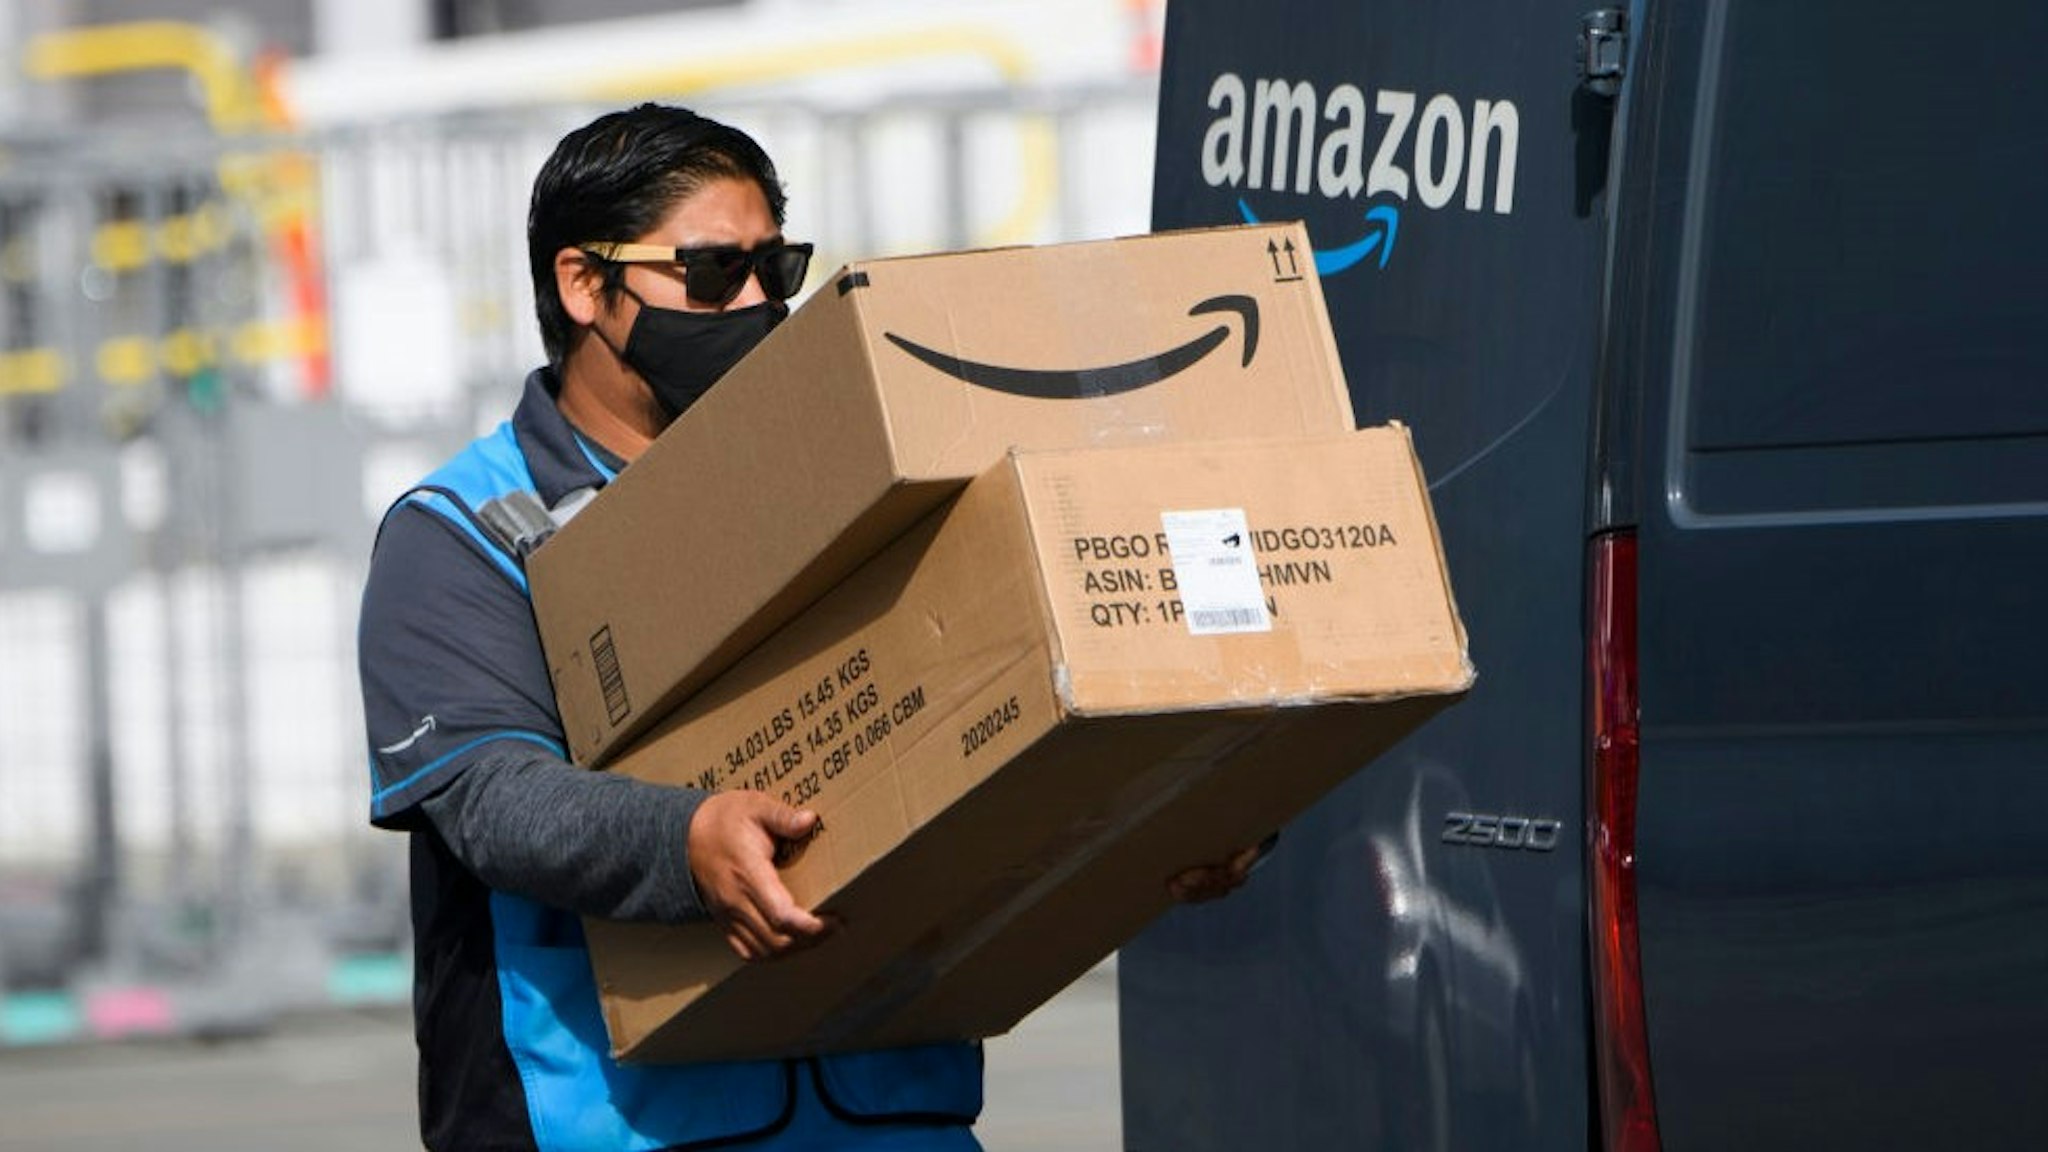 An Amazon.com Inc. delivery driver carries boxes into a van outside of a distribution facility on February 2, 2021 in Hawthorne, California. - Jeff Bezos said February 1, 2021, he would give up his role as chief executive of Amazon later this year as the tech and e-commerce giant reported a surge in profit and revenue in the holiday quarter. The announcement came as Amazon reported a blowout holiday quarter with profits more than doubling to $7.2 billion and revenue jumping 44 percent to $125.6 billion. (Photo by Patrick T. FALLON / AFP) (Photo by